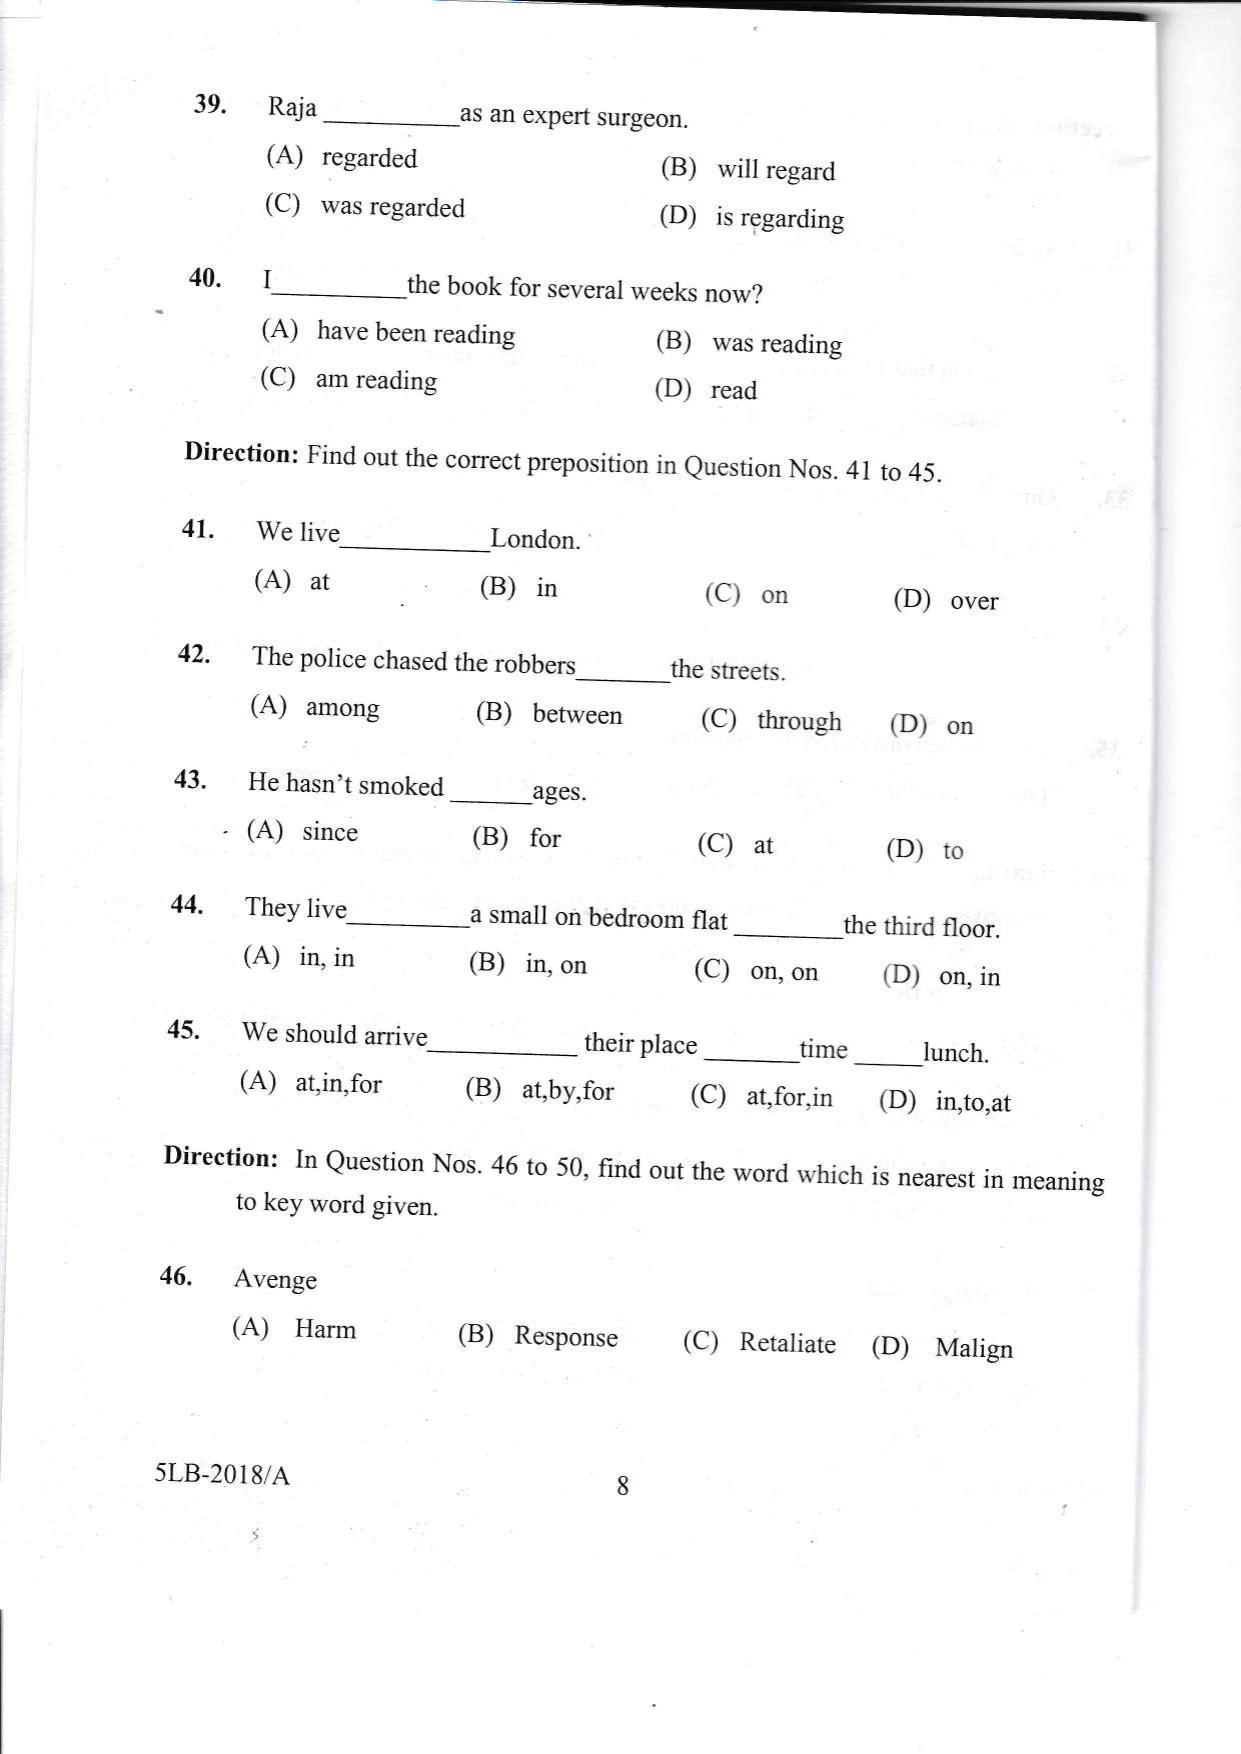 KLEE 5 Year LLB Exam 2018 Question Paper - Page 8